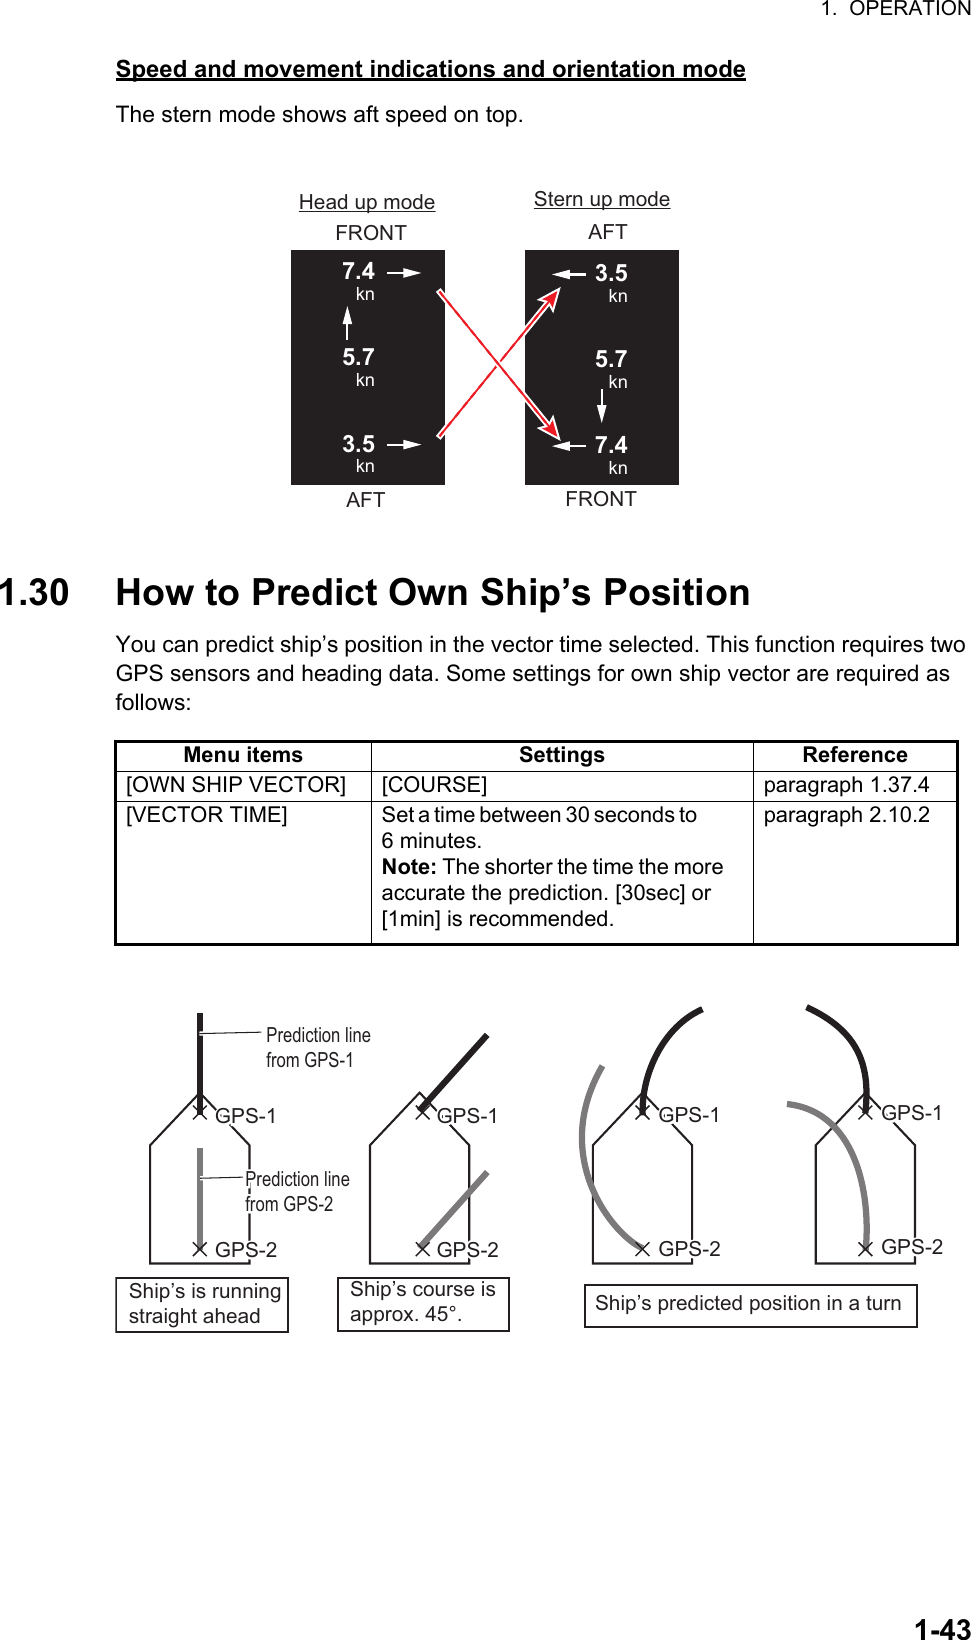 1.  OPERATION1-43Speed and movement indications and orientation modeThe stern mode shows aft speed on top.1.30 How to Predict Own Ship’s PositionYou can predict ship’s position in the vector time selected. This function requires two GPS sensors and heading data. Some settings for own ship vector are required as   follows:Menu items Settings Reference[OWN SHIP VECTOR] [COURSE] paragraph 1.37.4[VECTOR  TIME] Set a time between 30 sec ond s t o            6 minutes.Note: The shorter the time the more    accurate the prediction. [30sec] or [1min] is recommended.paragraph 2.10.2Head up mode Stern up modeFRONT AFTAFT FRONT7.4kn5.7kn3.5kn3.5kn5.7kn7.4knGPS-1GPS-1GPS-2GPS-2GPS-1GPS-1GPS-2GPS-2GPS-1GPS-1GPS-2GPS-2GPS-1GPS-1GPS-2GPS-2Prediction line from GPS-1Prediction line from GPS-1Prediction line from GPS-2Prediction line from GPS-2Ship’s is running straight aheadShip’s course is approx. 45°. Ship’s predicted position in a turn